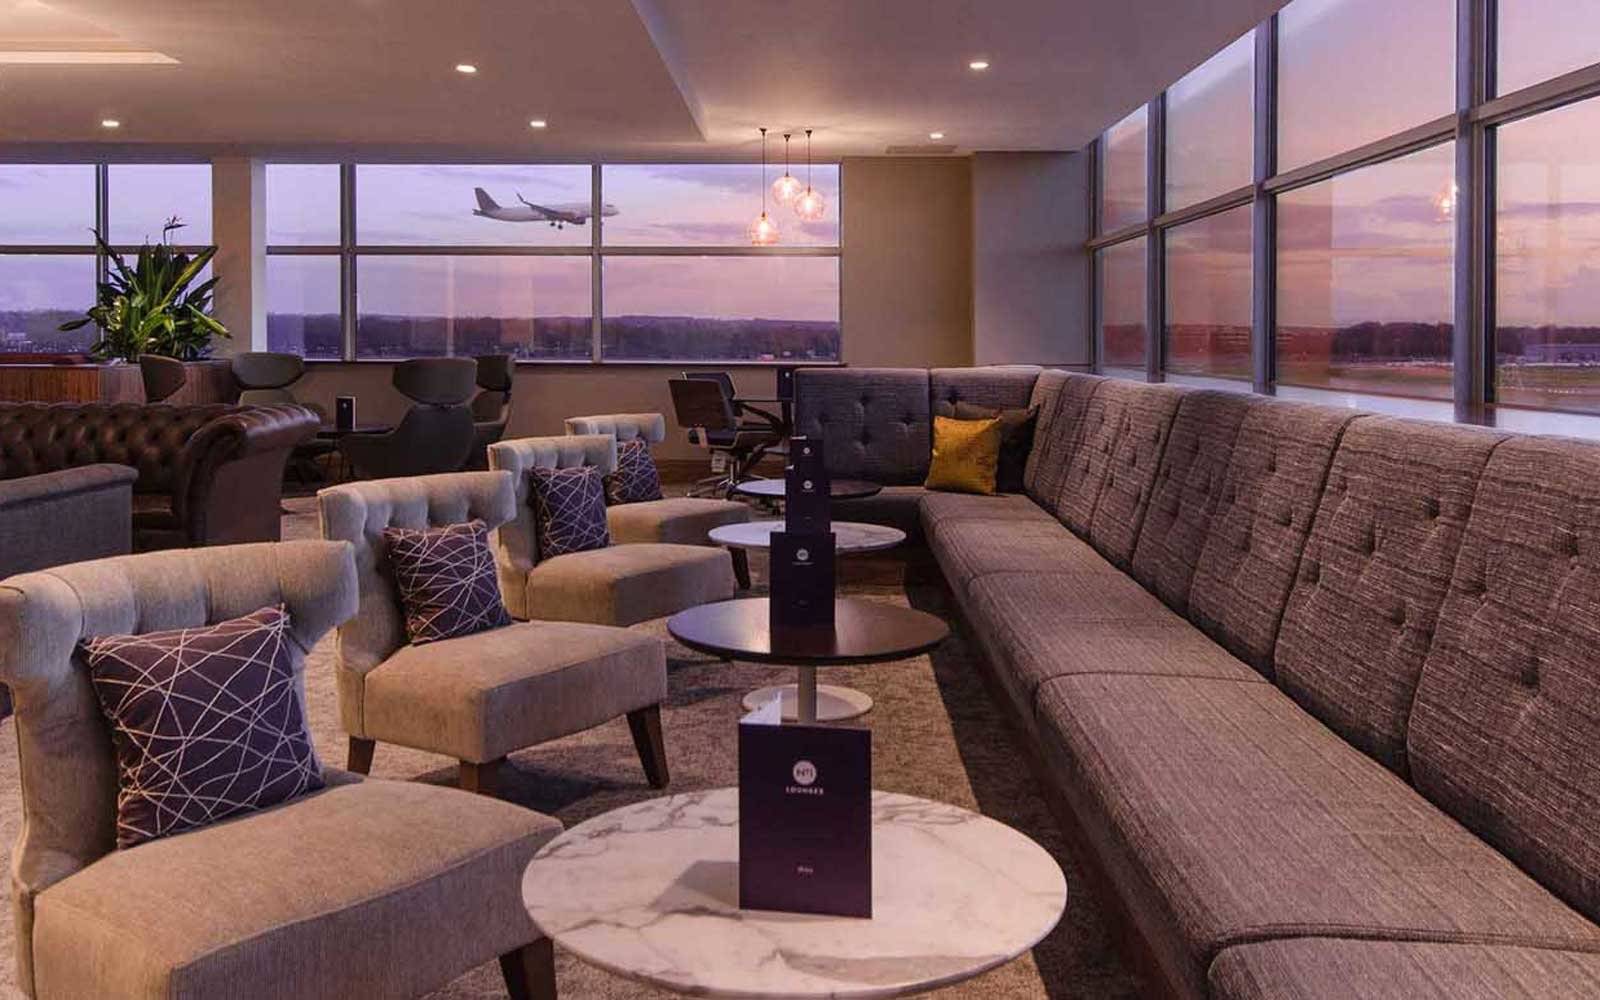 First Class Airport Lounges at Economy Prices